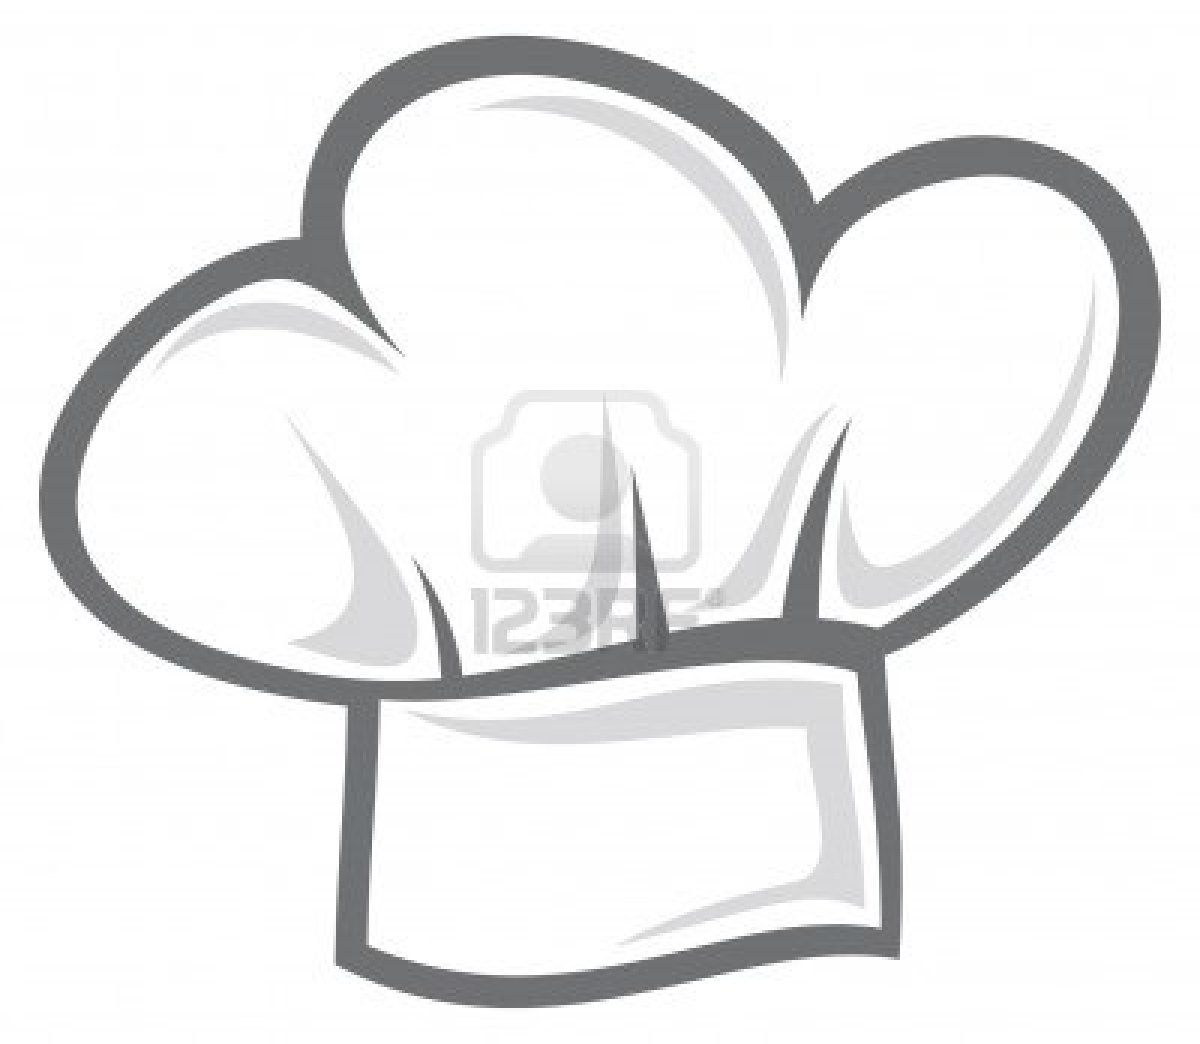 free chef hat clipart - photo #25